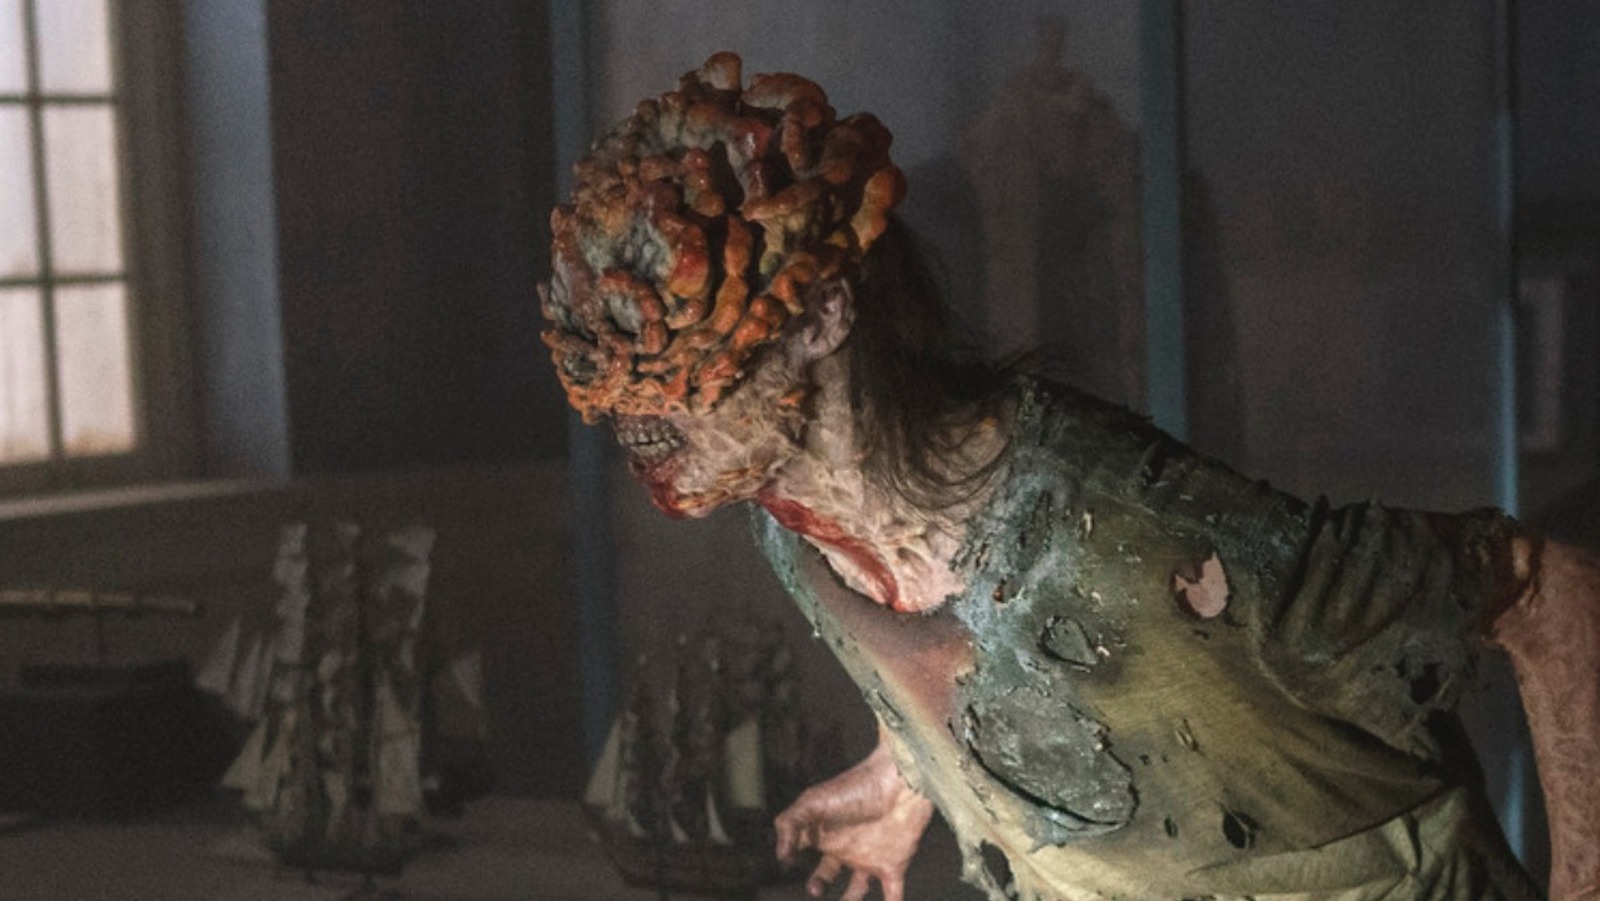 An Improv Comedian Brought The Last Of Us' Clickers To Horrifying Life